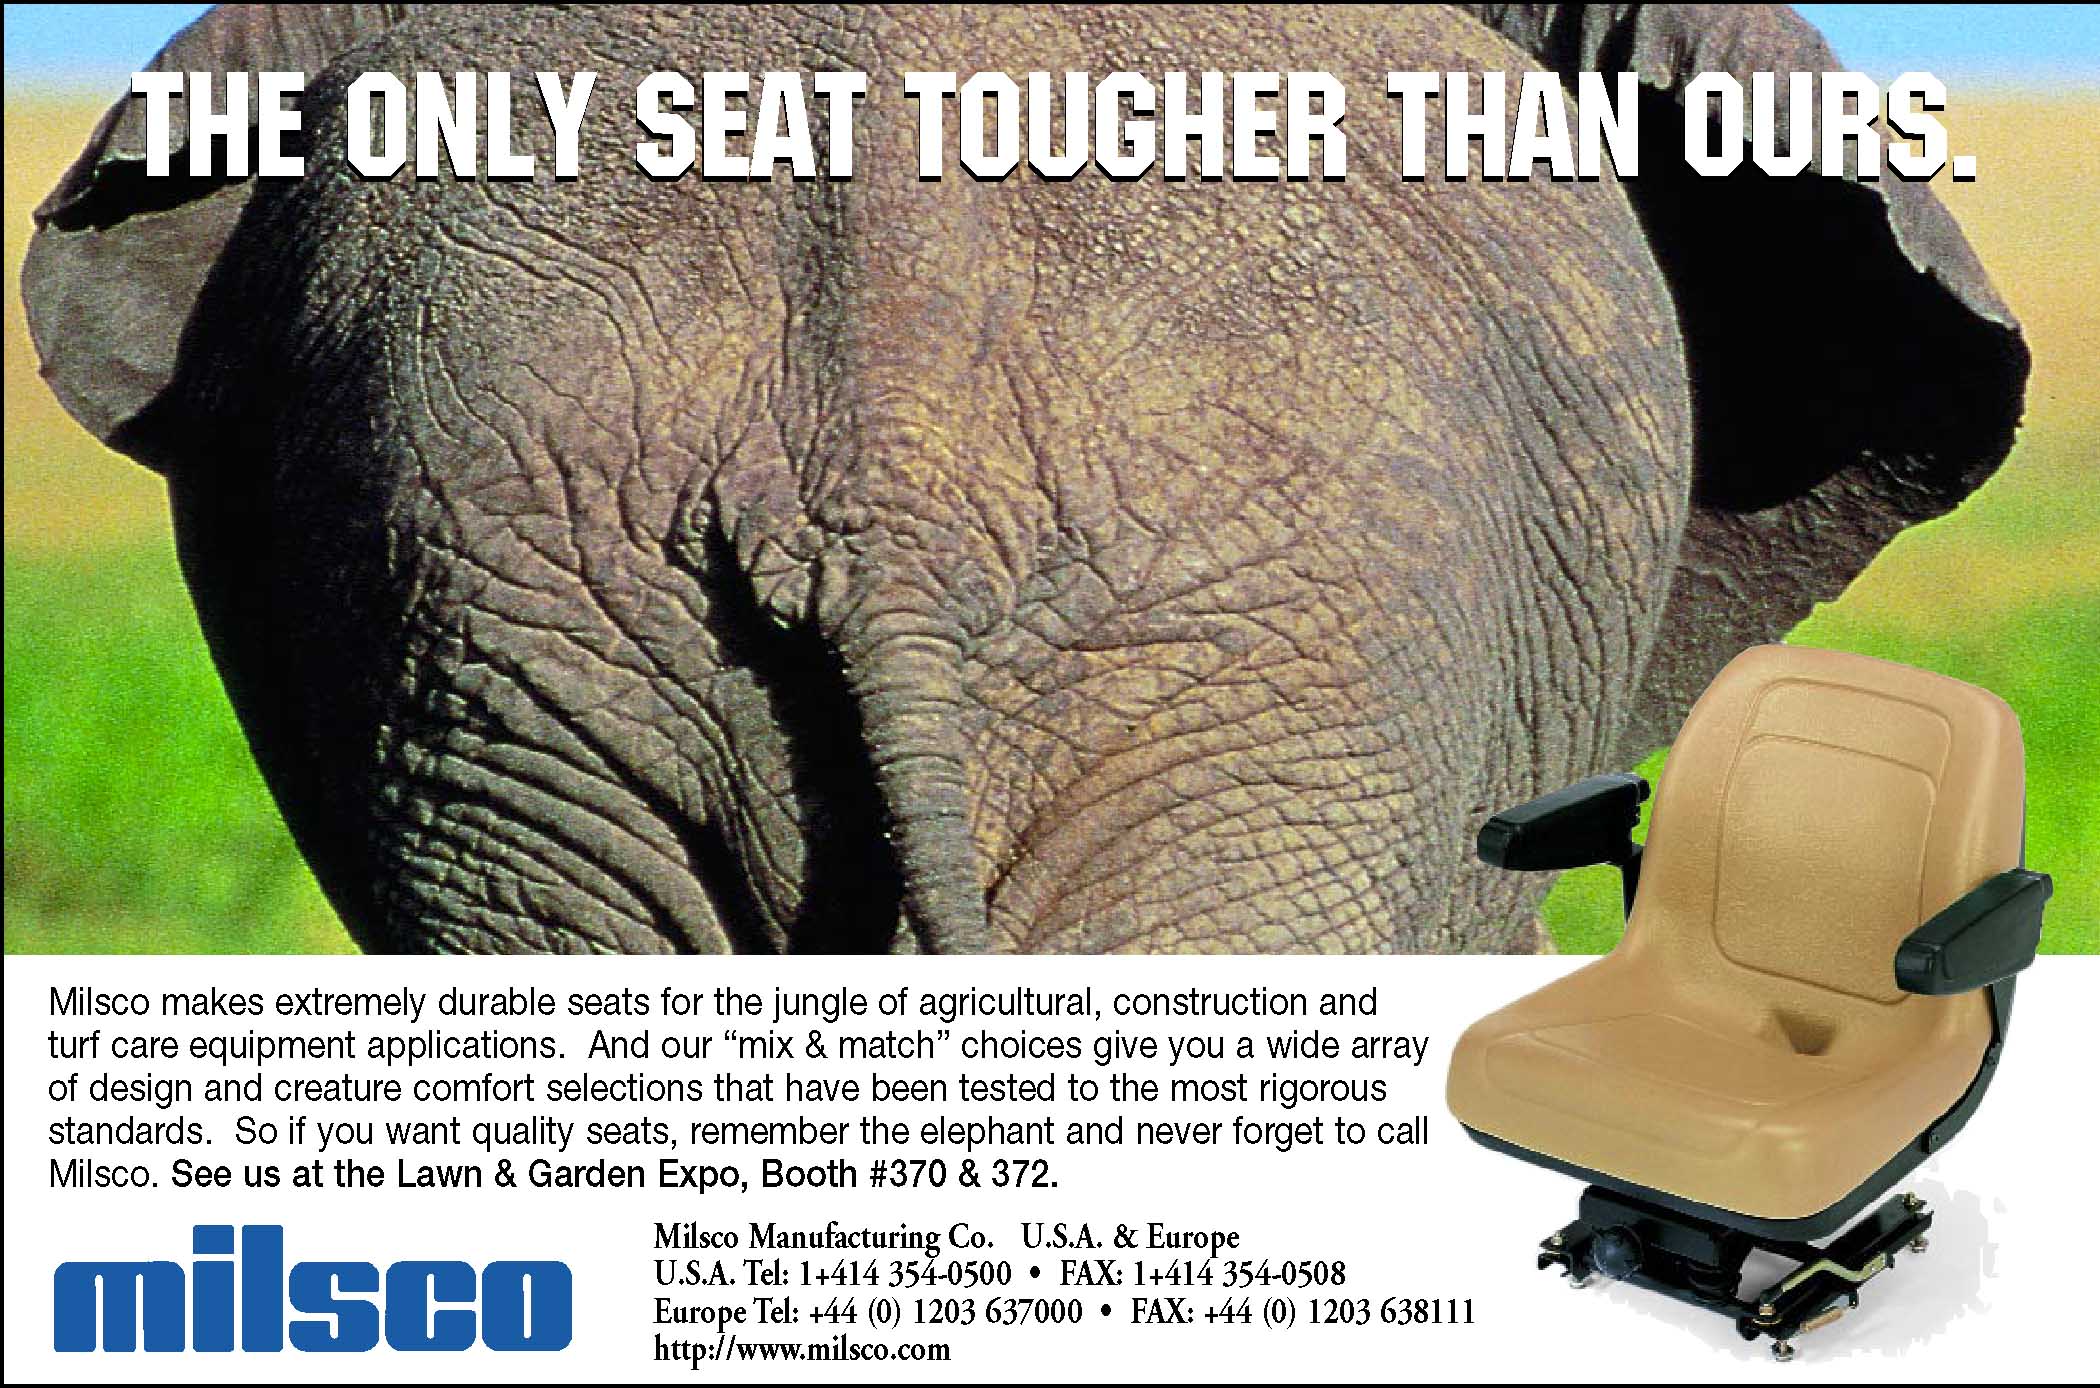 Only One Tougher Seat Ad for Milsco Seats